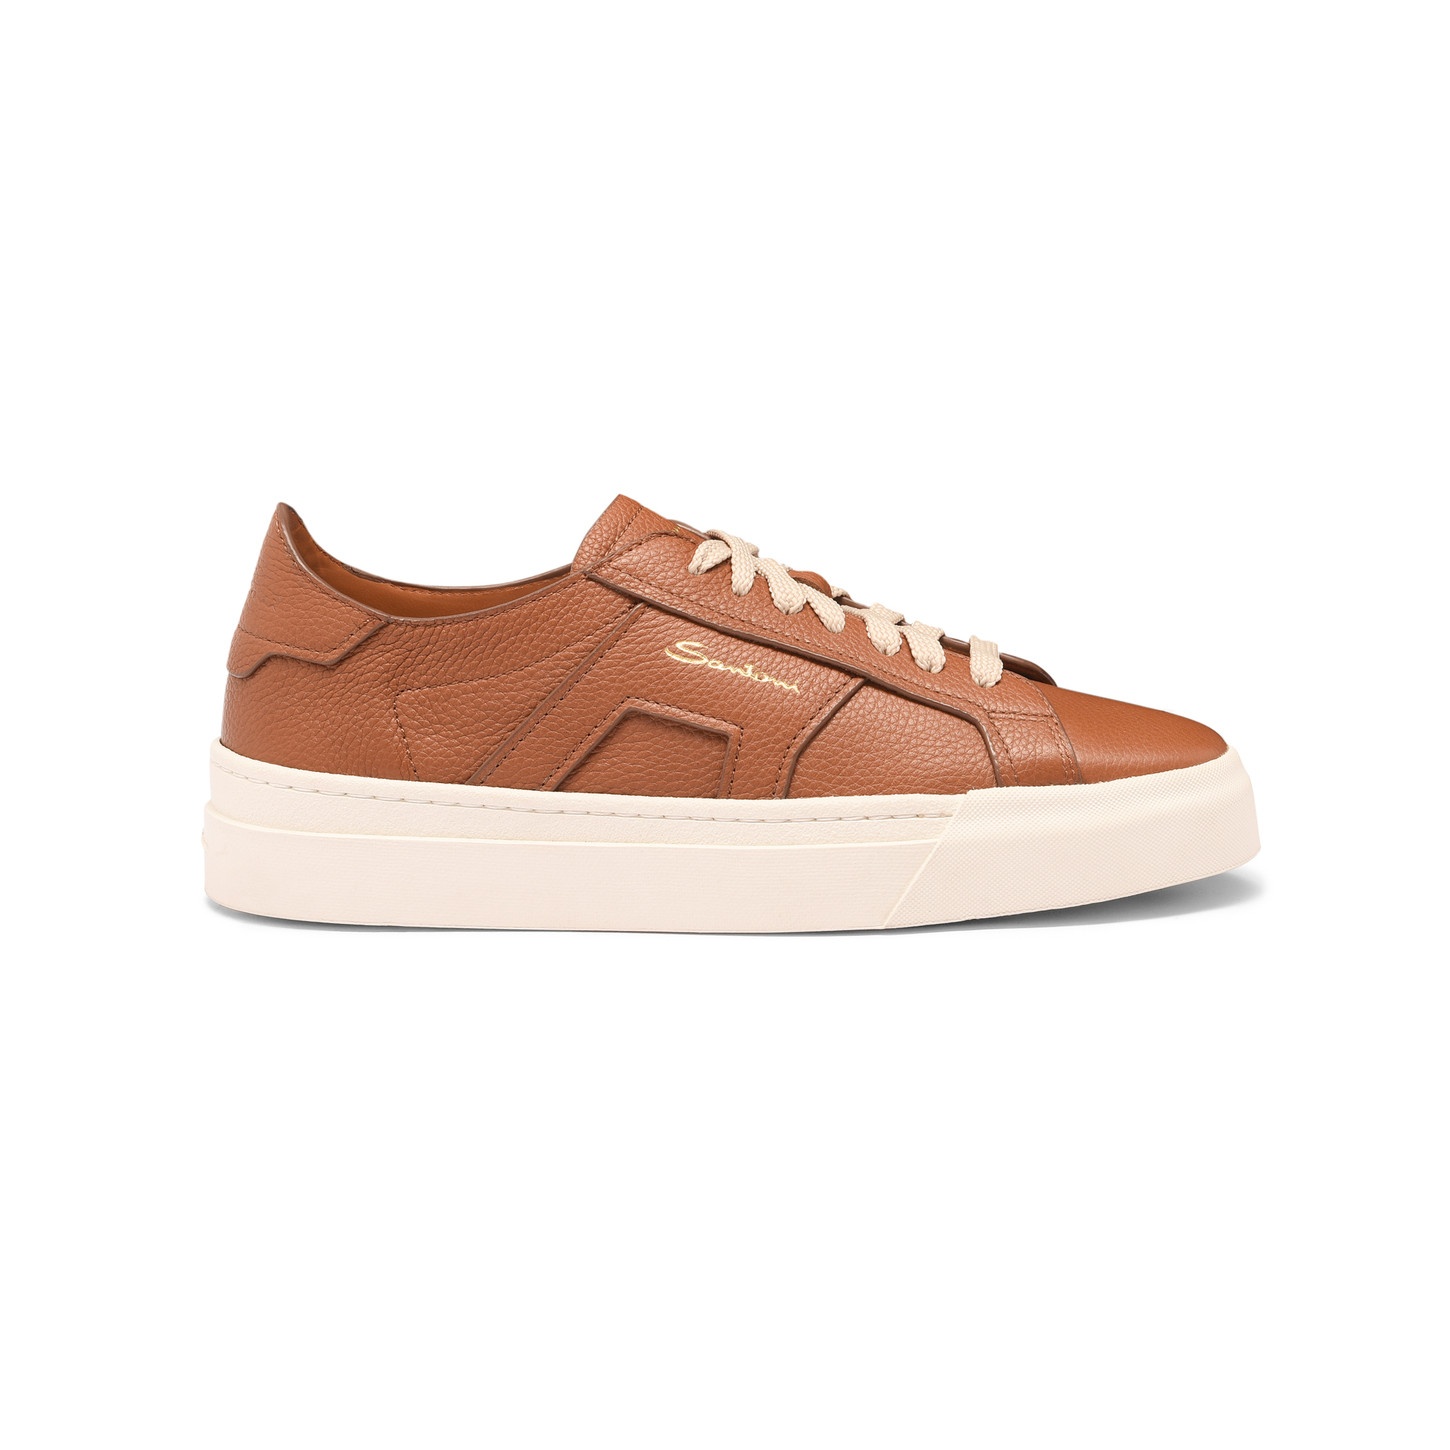 Women's brown tumbled leather Double Buckle Sneaker - 1